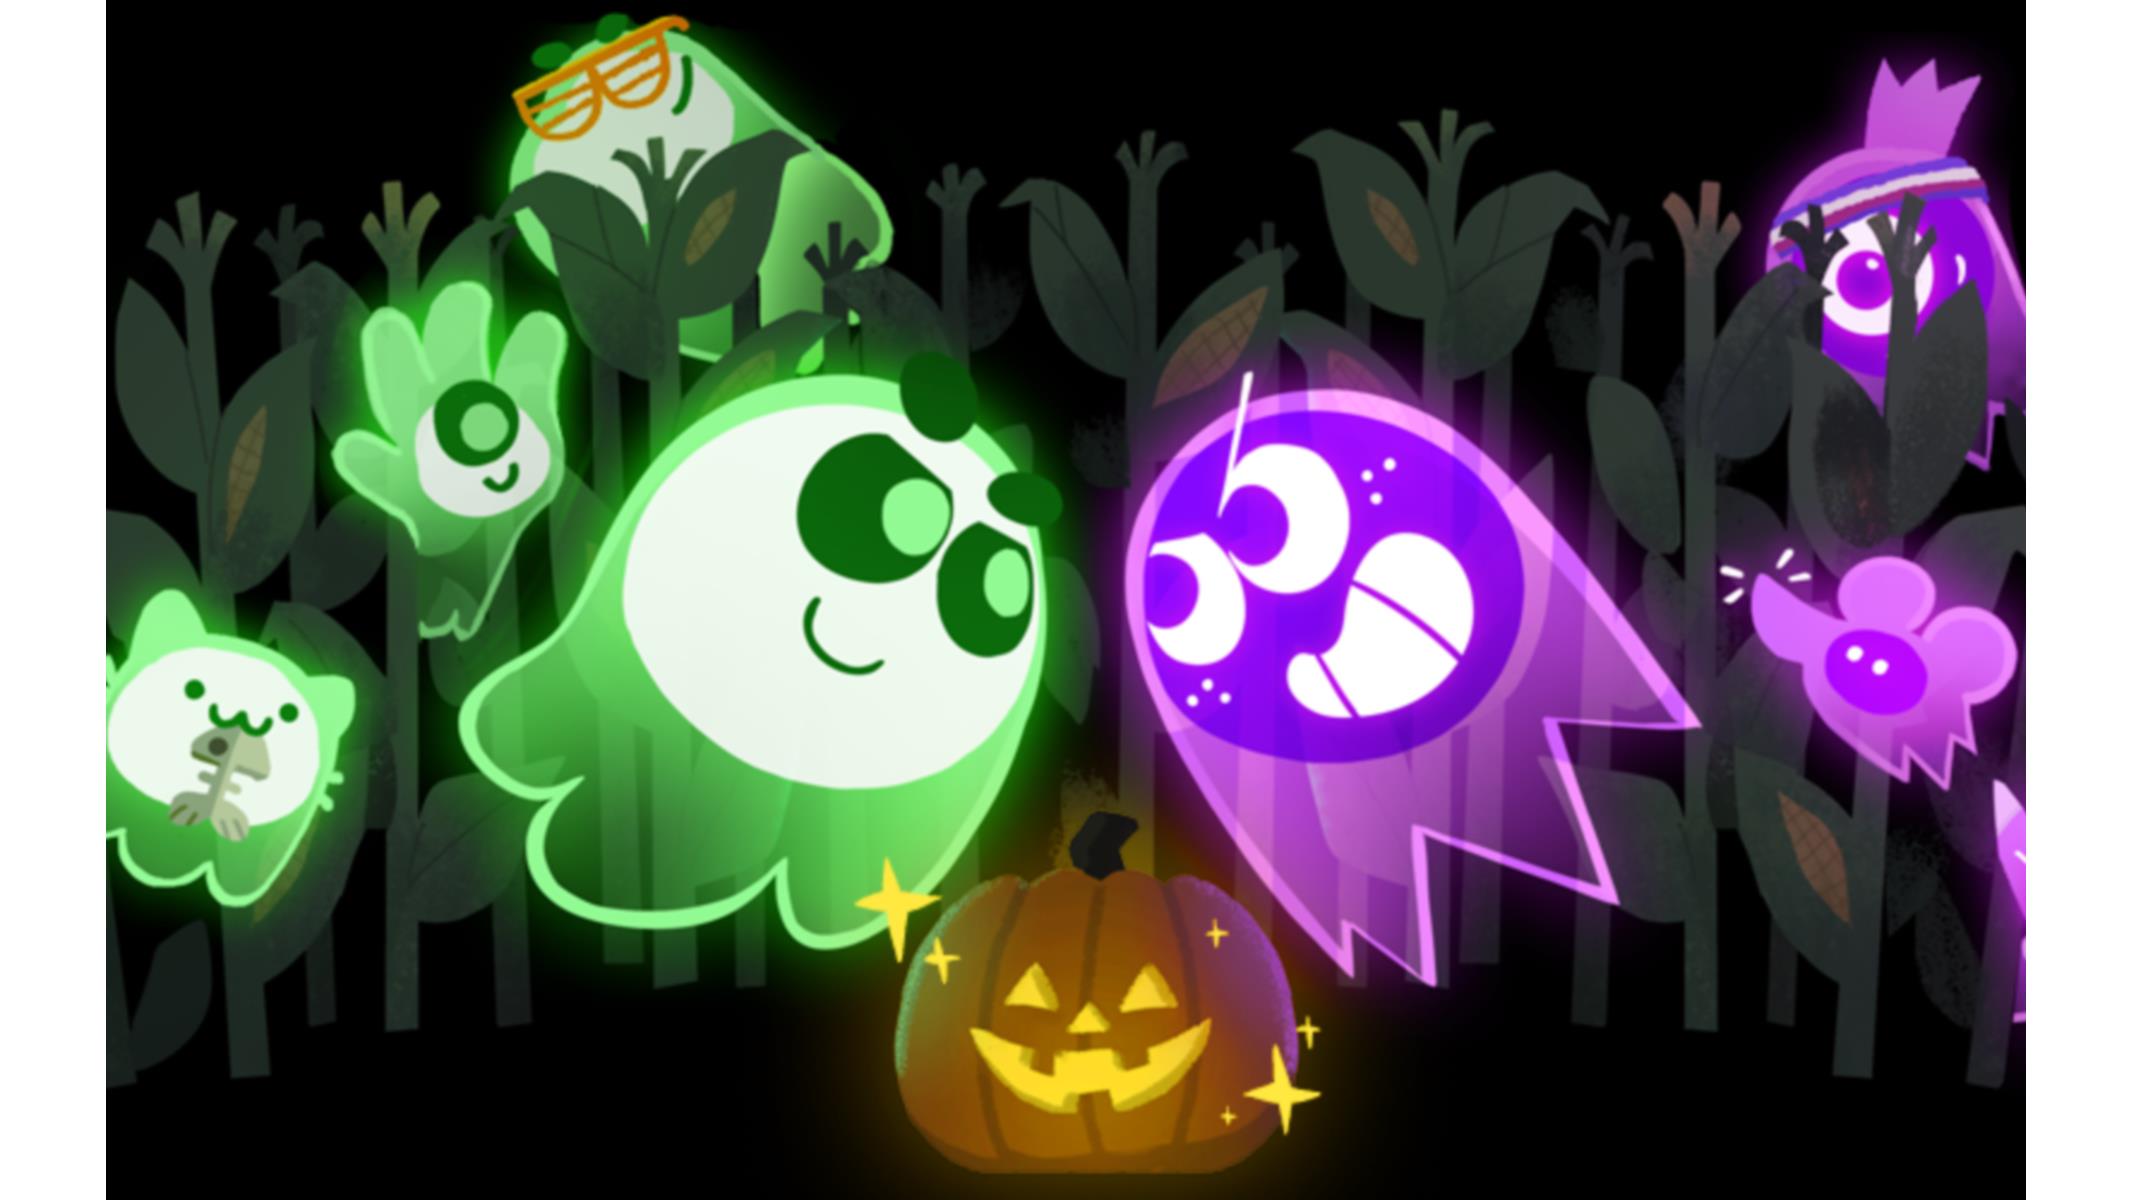 Halloween 2018 (Google Doodle)  Doodles, Google doodles, Halloween pictures